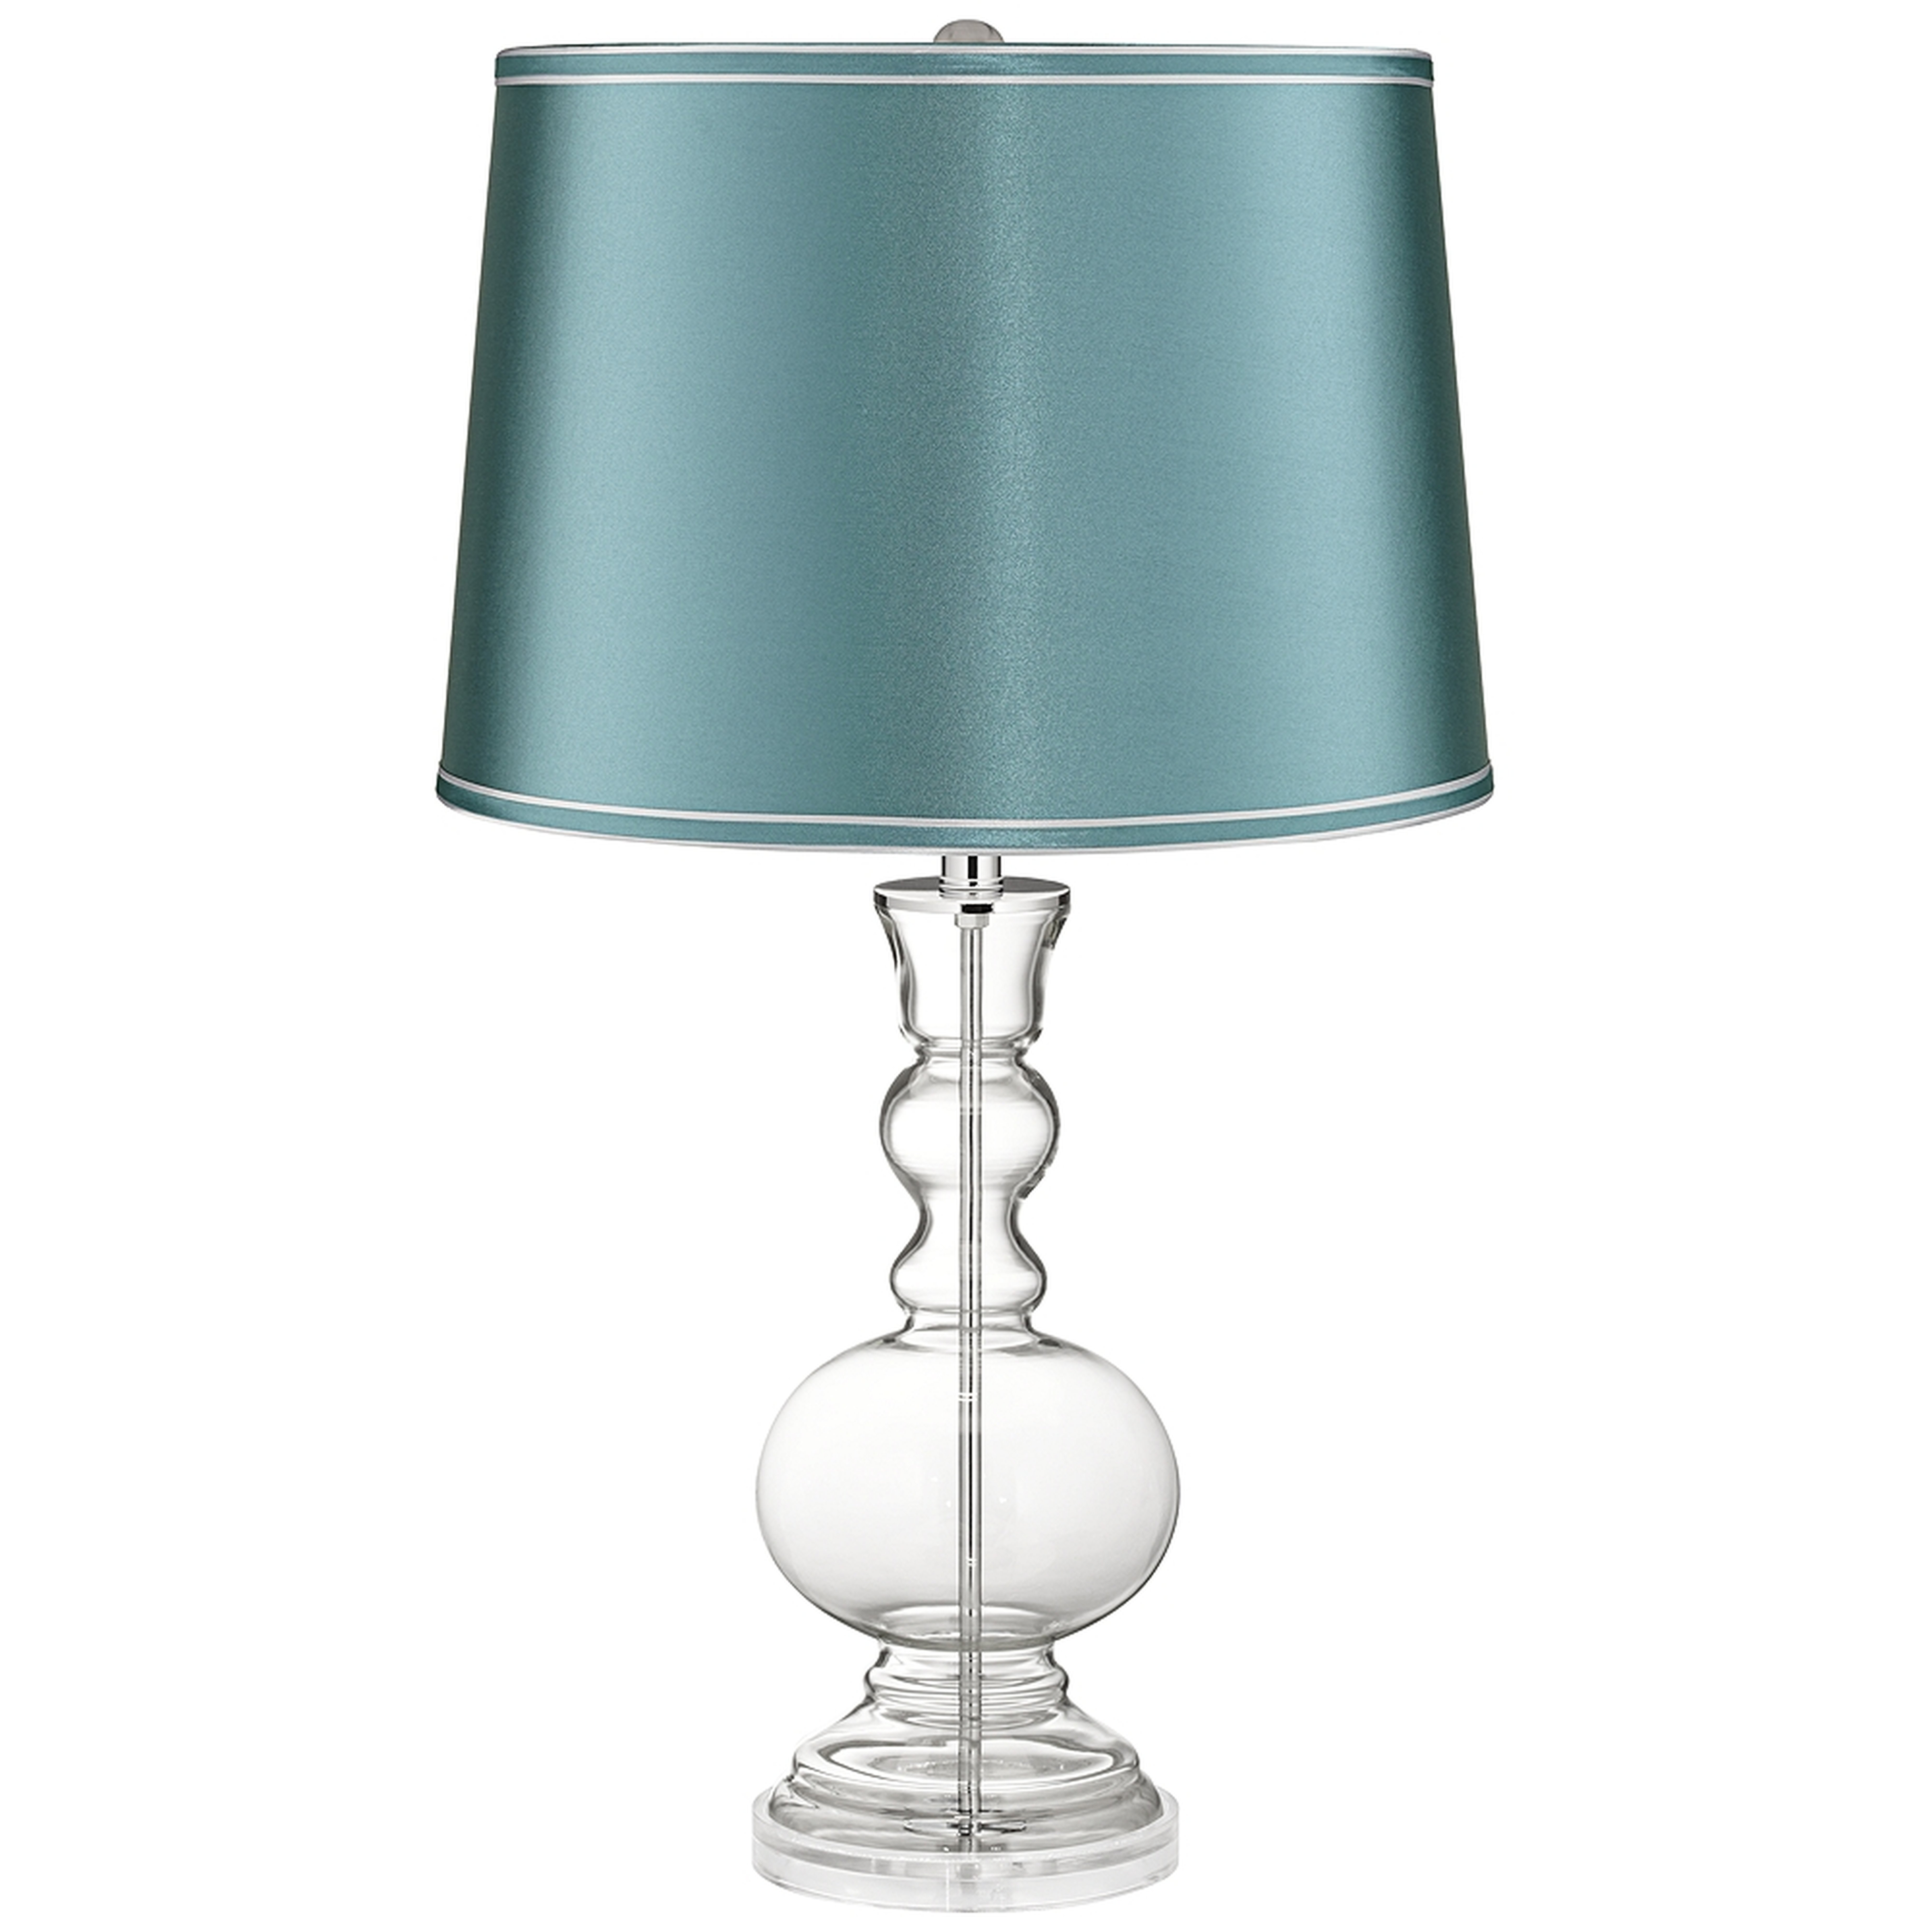 Clear Fillable Glass Teal Satin Shade Apothecary Table Lamp - Style # 62P16 - Lamps Plus